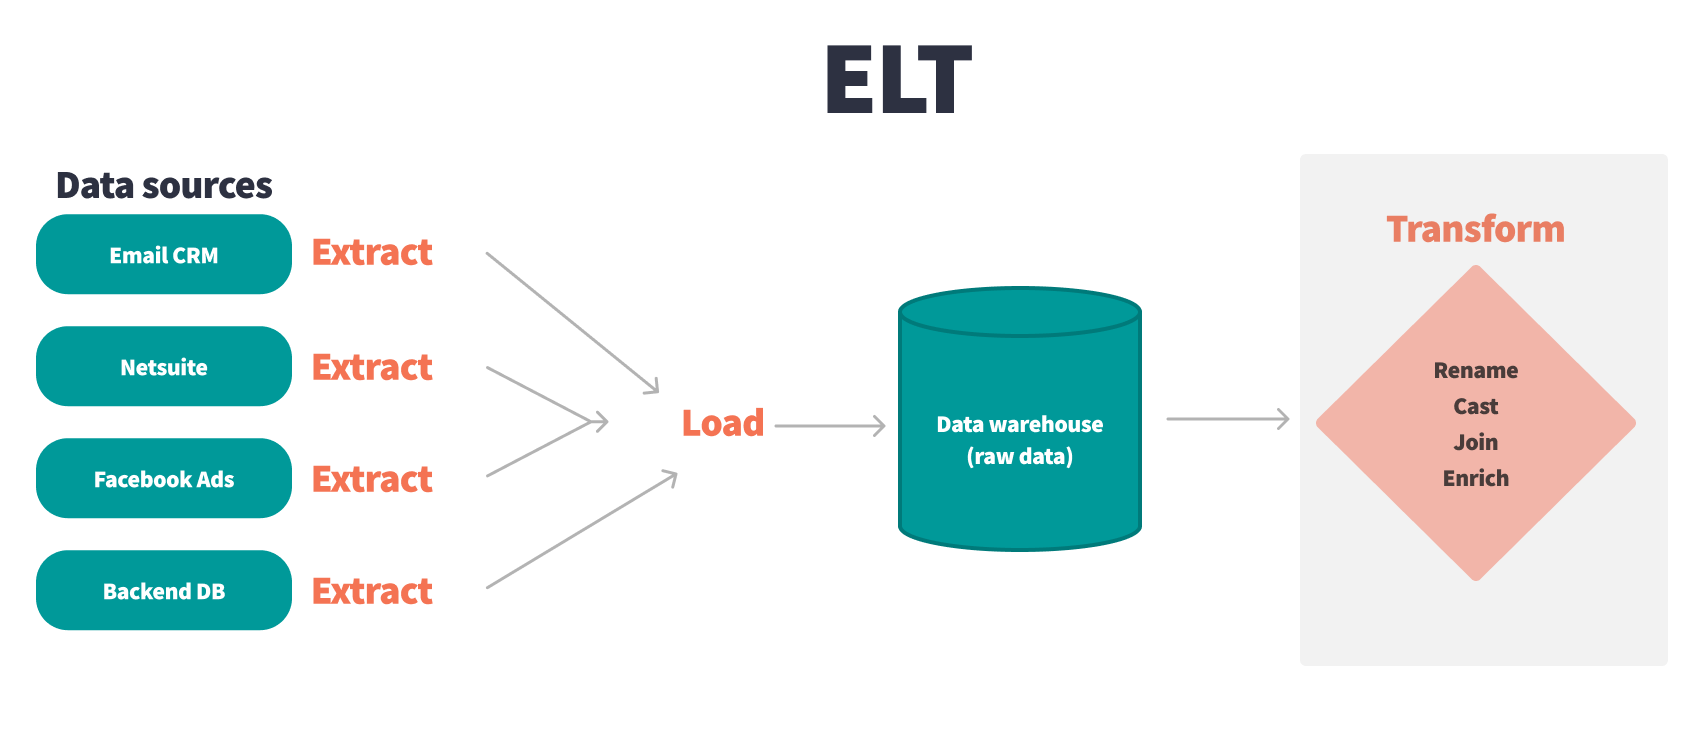 This image depicts the ELT process. This process starts with extracting data from disparate sources like Email CRM, accounting software, social media ad platforms, and backend databases. After extraction, the raw data is then loaded into the data warehouse. Finally, the raw data is transformed within the data warehouse. These transformations typically including renaming, casting, joining, and enriching the said raw data.